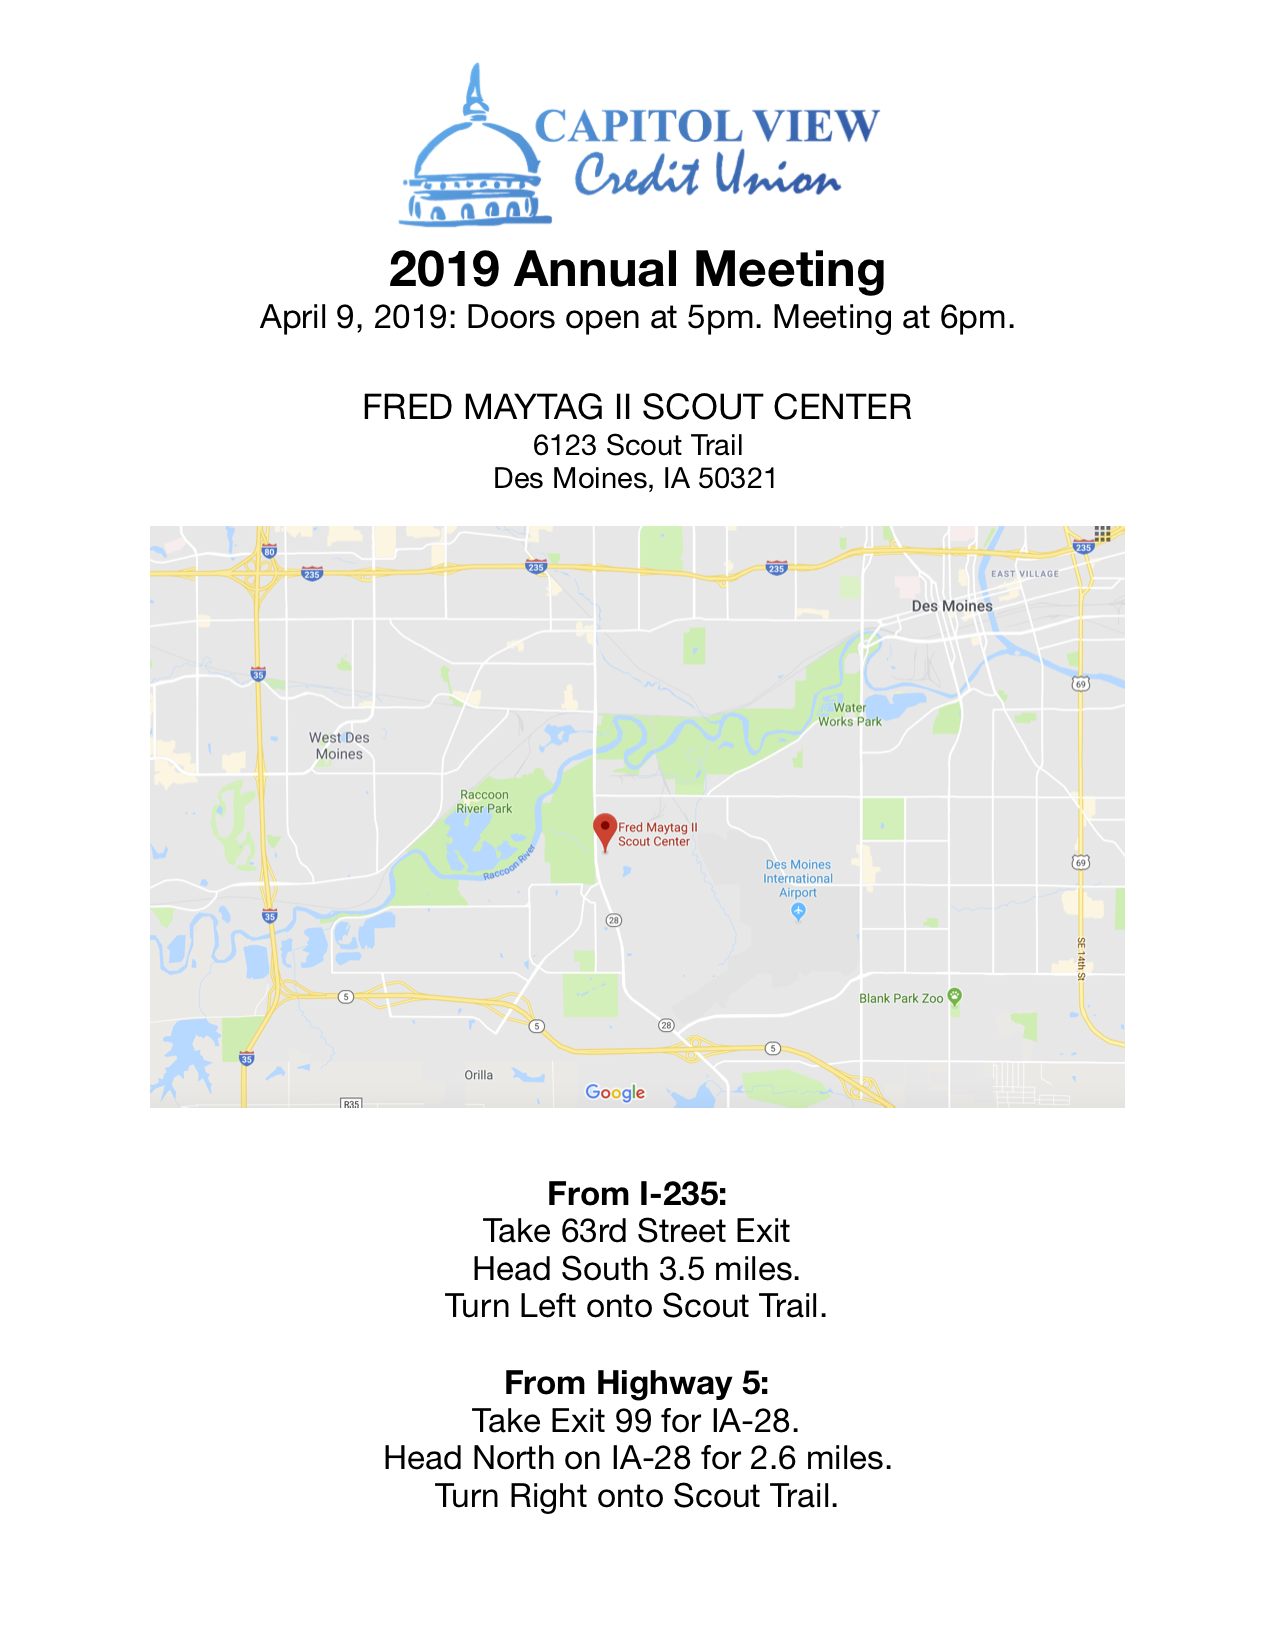 Annual meeting directions - Capitol View Credit Union